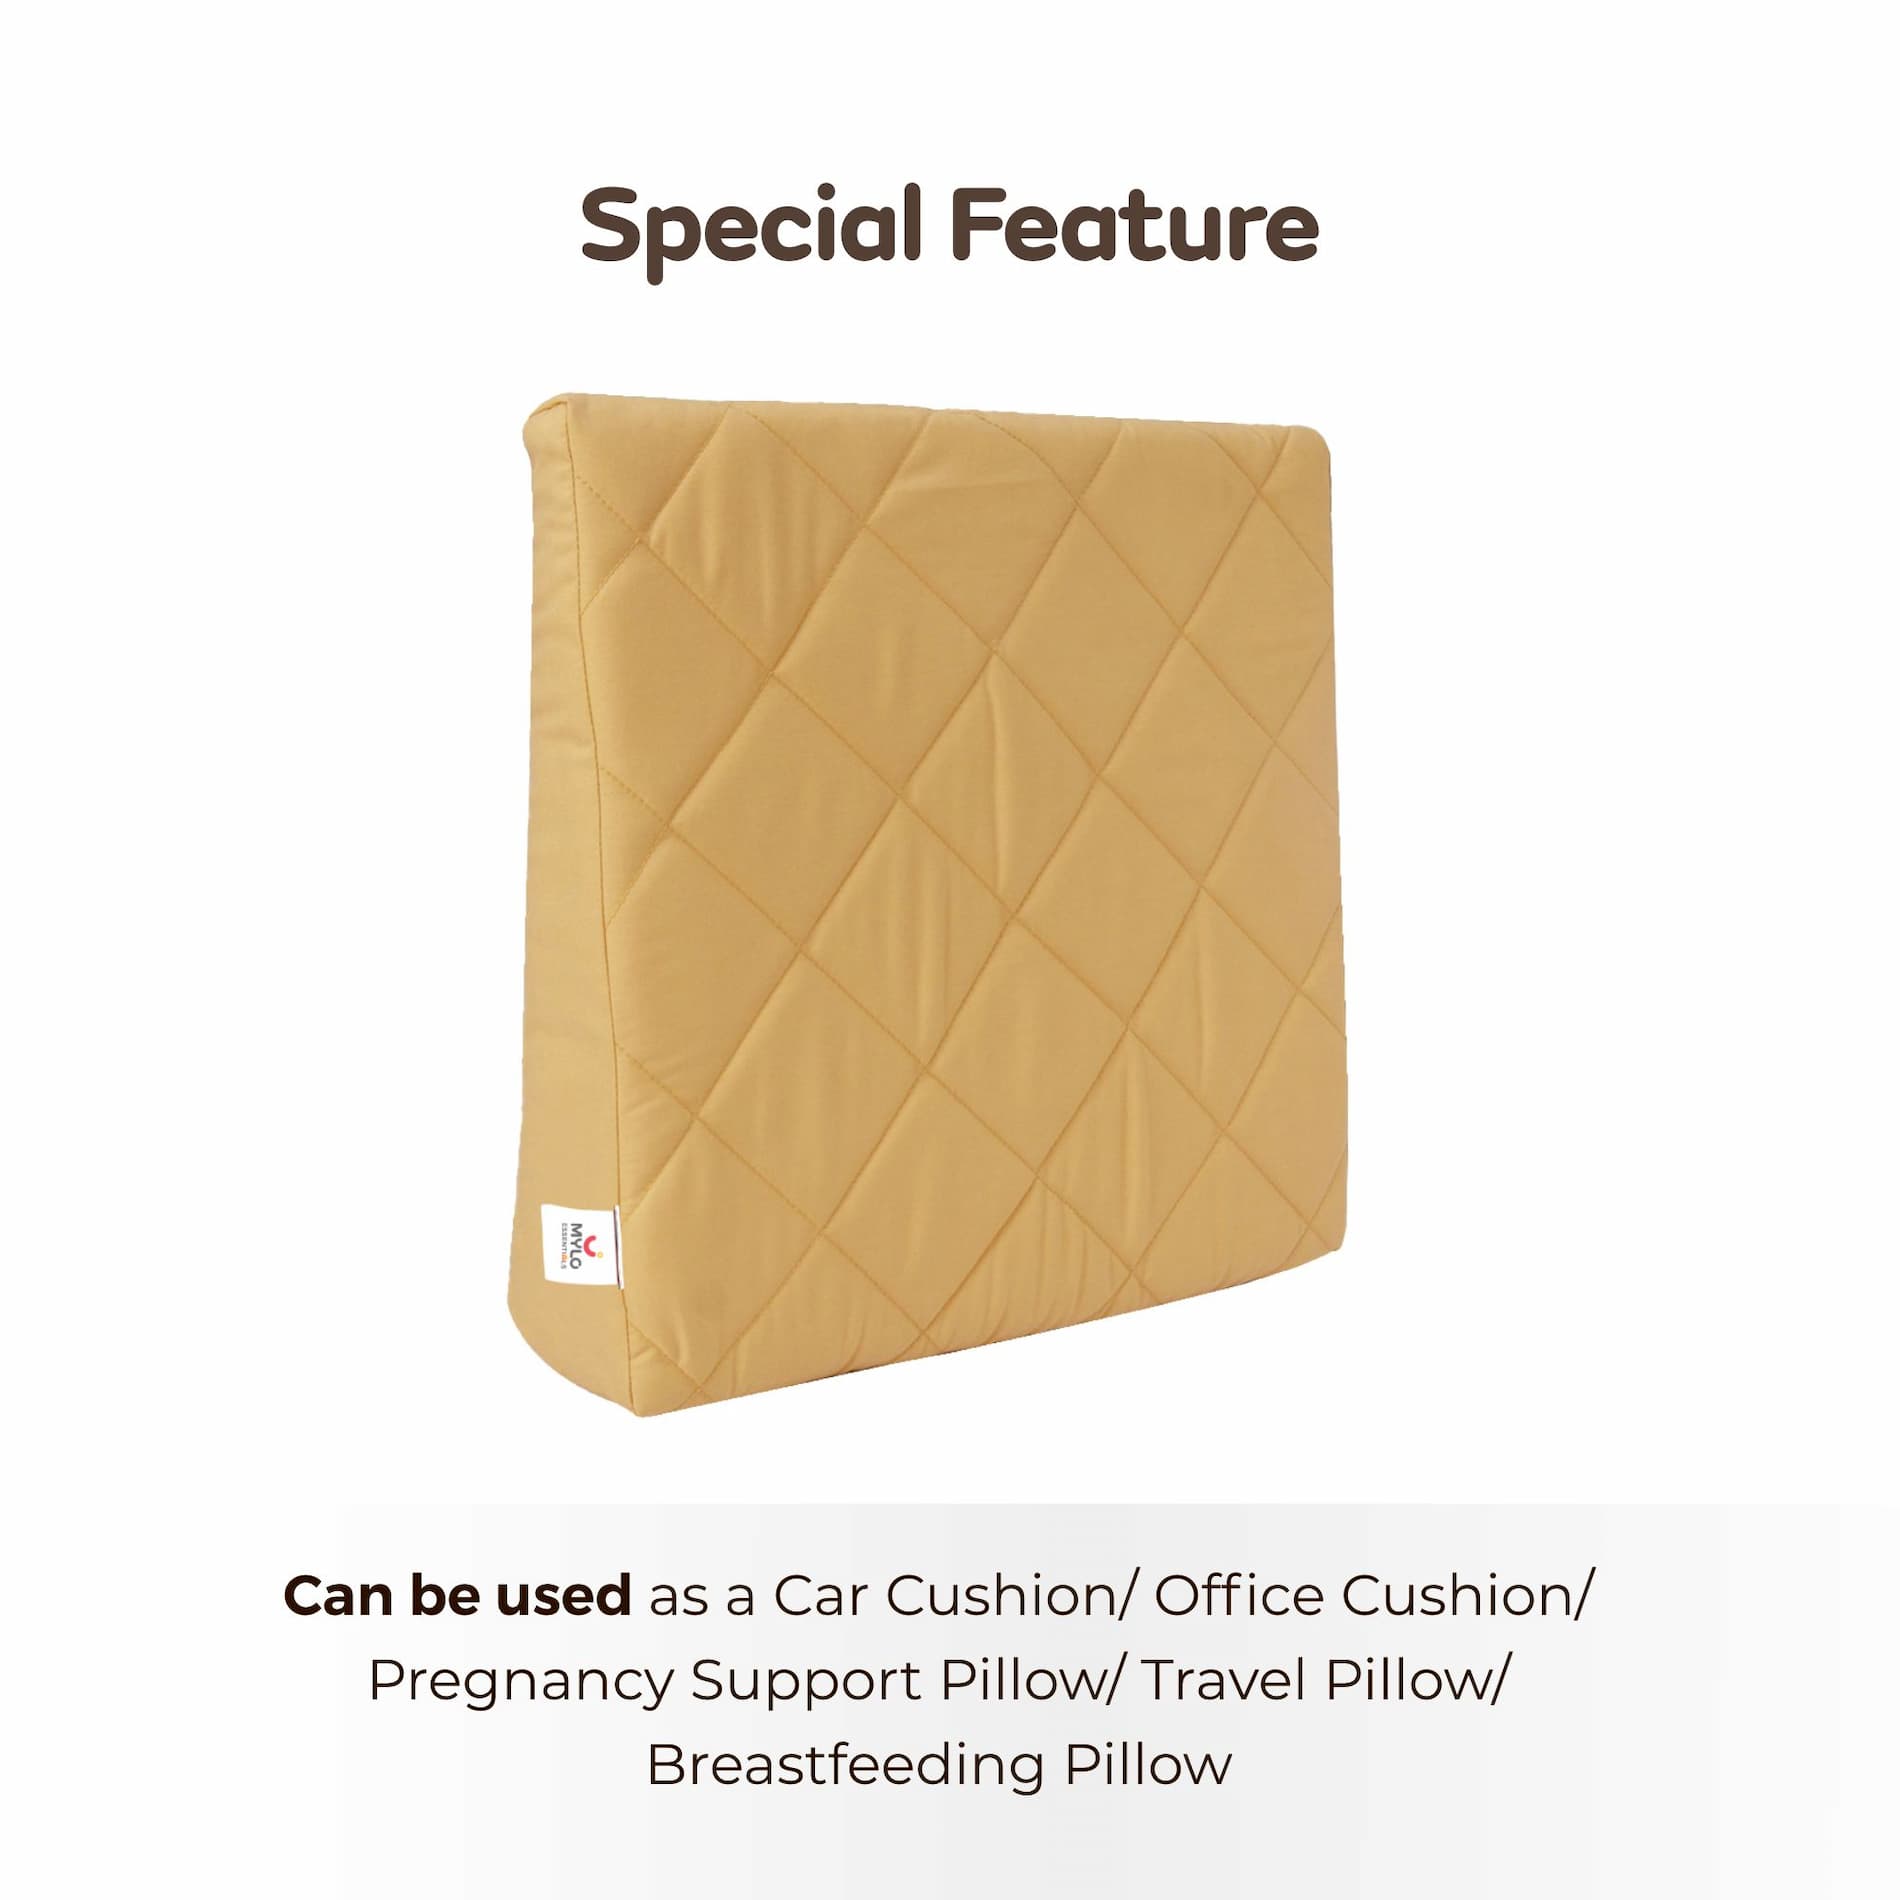 Multipurpose Maternity Wedge Pillow with Quilted Cover for Pregnancy Support - Light Brown